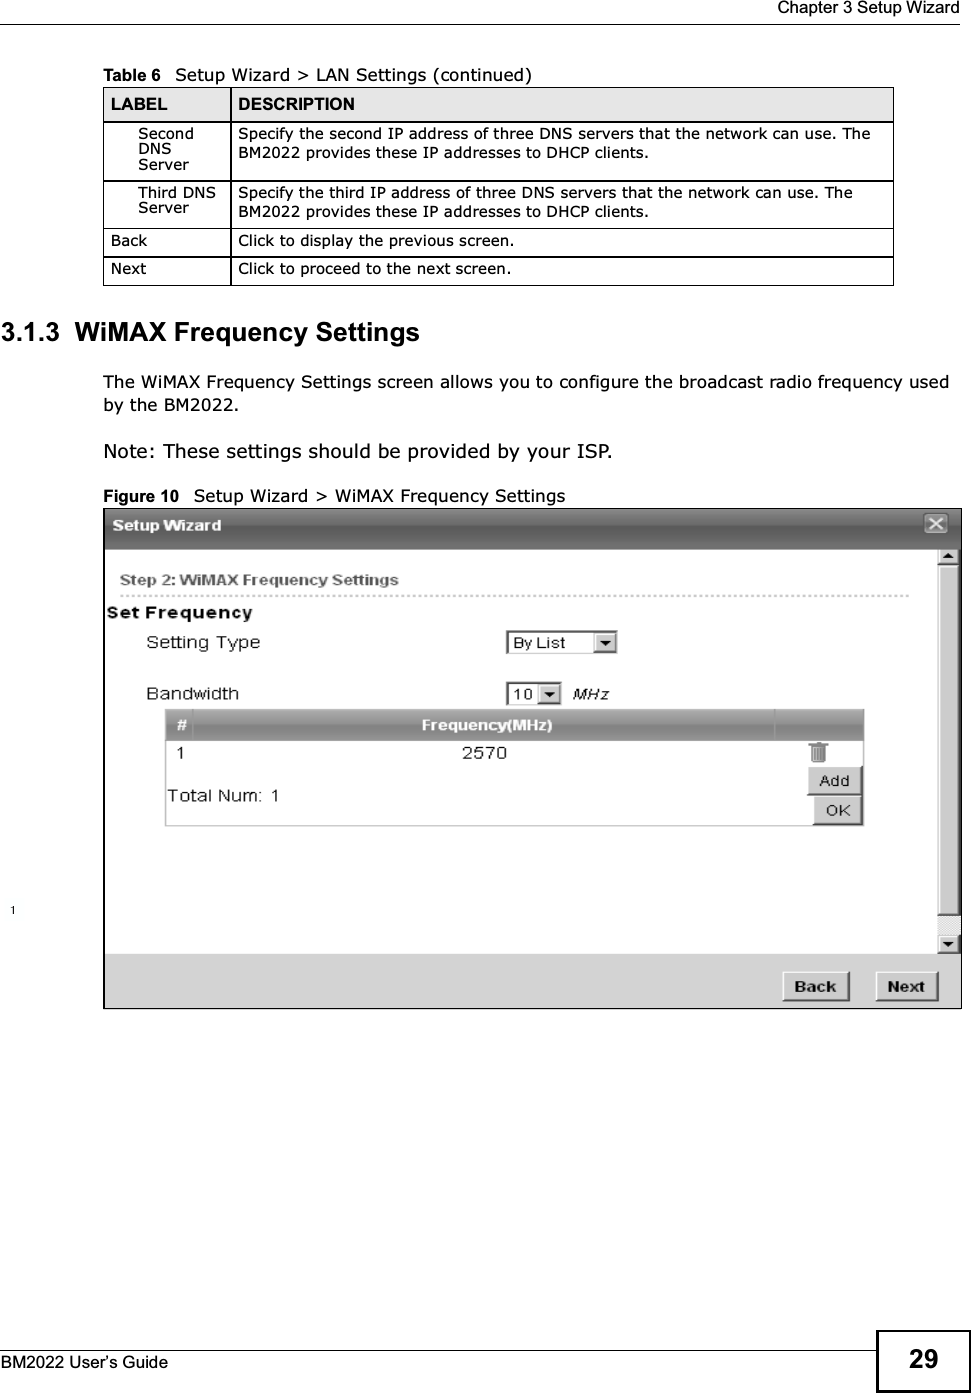  Chapter 3 Setup WizardBM2022 Users Guide 293.1.3  WiMAX Frequency SettingsThe WiMAX Frequency Settings screen allows you to configure the broadcast radio frequency used by the BM2022.Note: These settings should be provided by your ISP.Figure 10   Setup Wizard &gt; WiMAX Frequency SettingsSecond DNS ServerSpecify the second IP address of three DNS servers that the network can use. The BM2022 provides these IP addresses to DHCP clients.Third DNS ServerSpecify the third IP address of three DNS servers that the network can use. The BM2022 provides these IP addresses to DHCP clients.Back Click to display the previous screen.Next Click to proceed to the next screen. Table 6   Setup Wizard &gt; LAN Settings (continued)LABEL DESCRIPTION